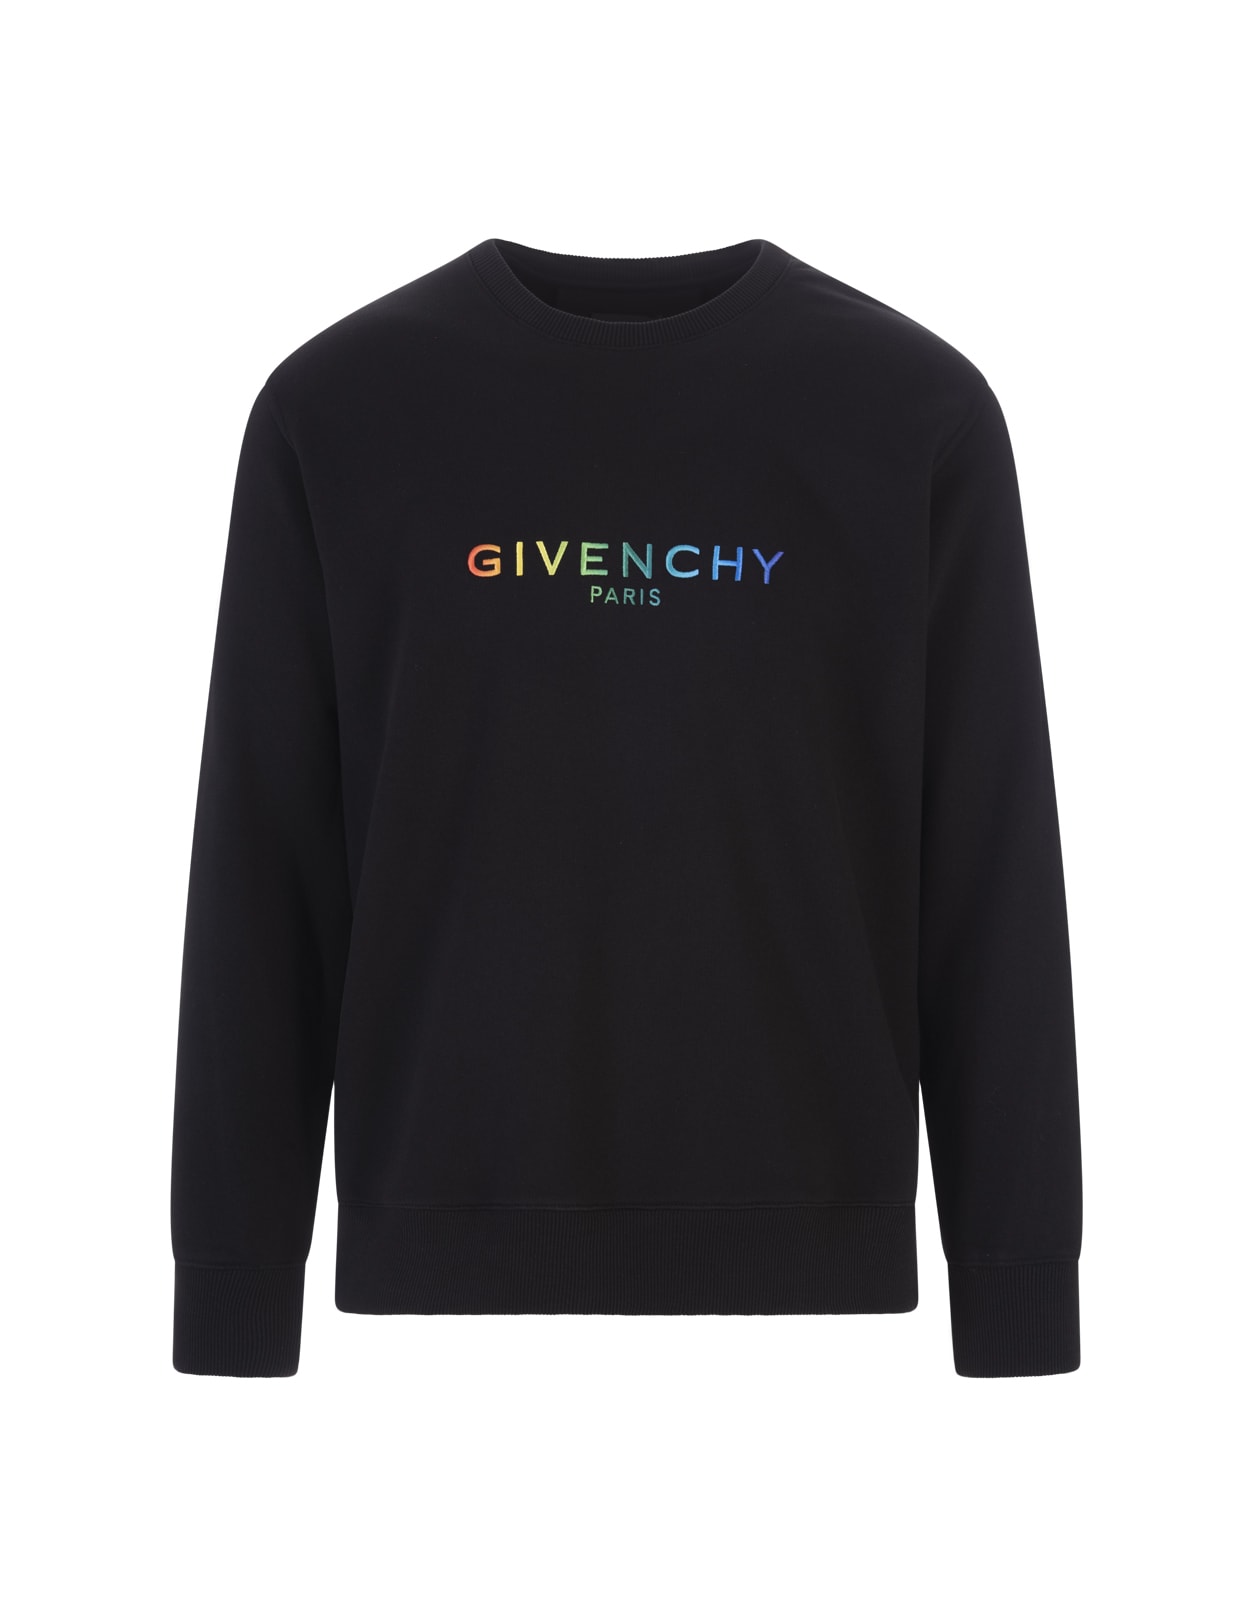 Givenchy Man Black Sweatshirt With Multicolored Signature